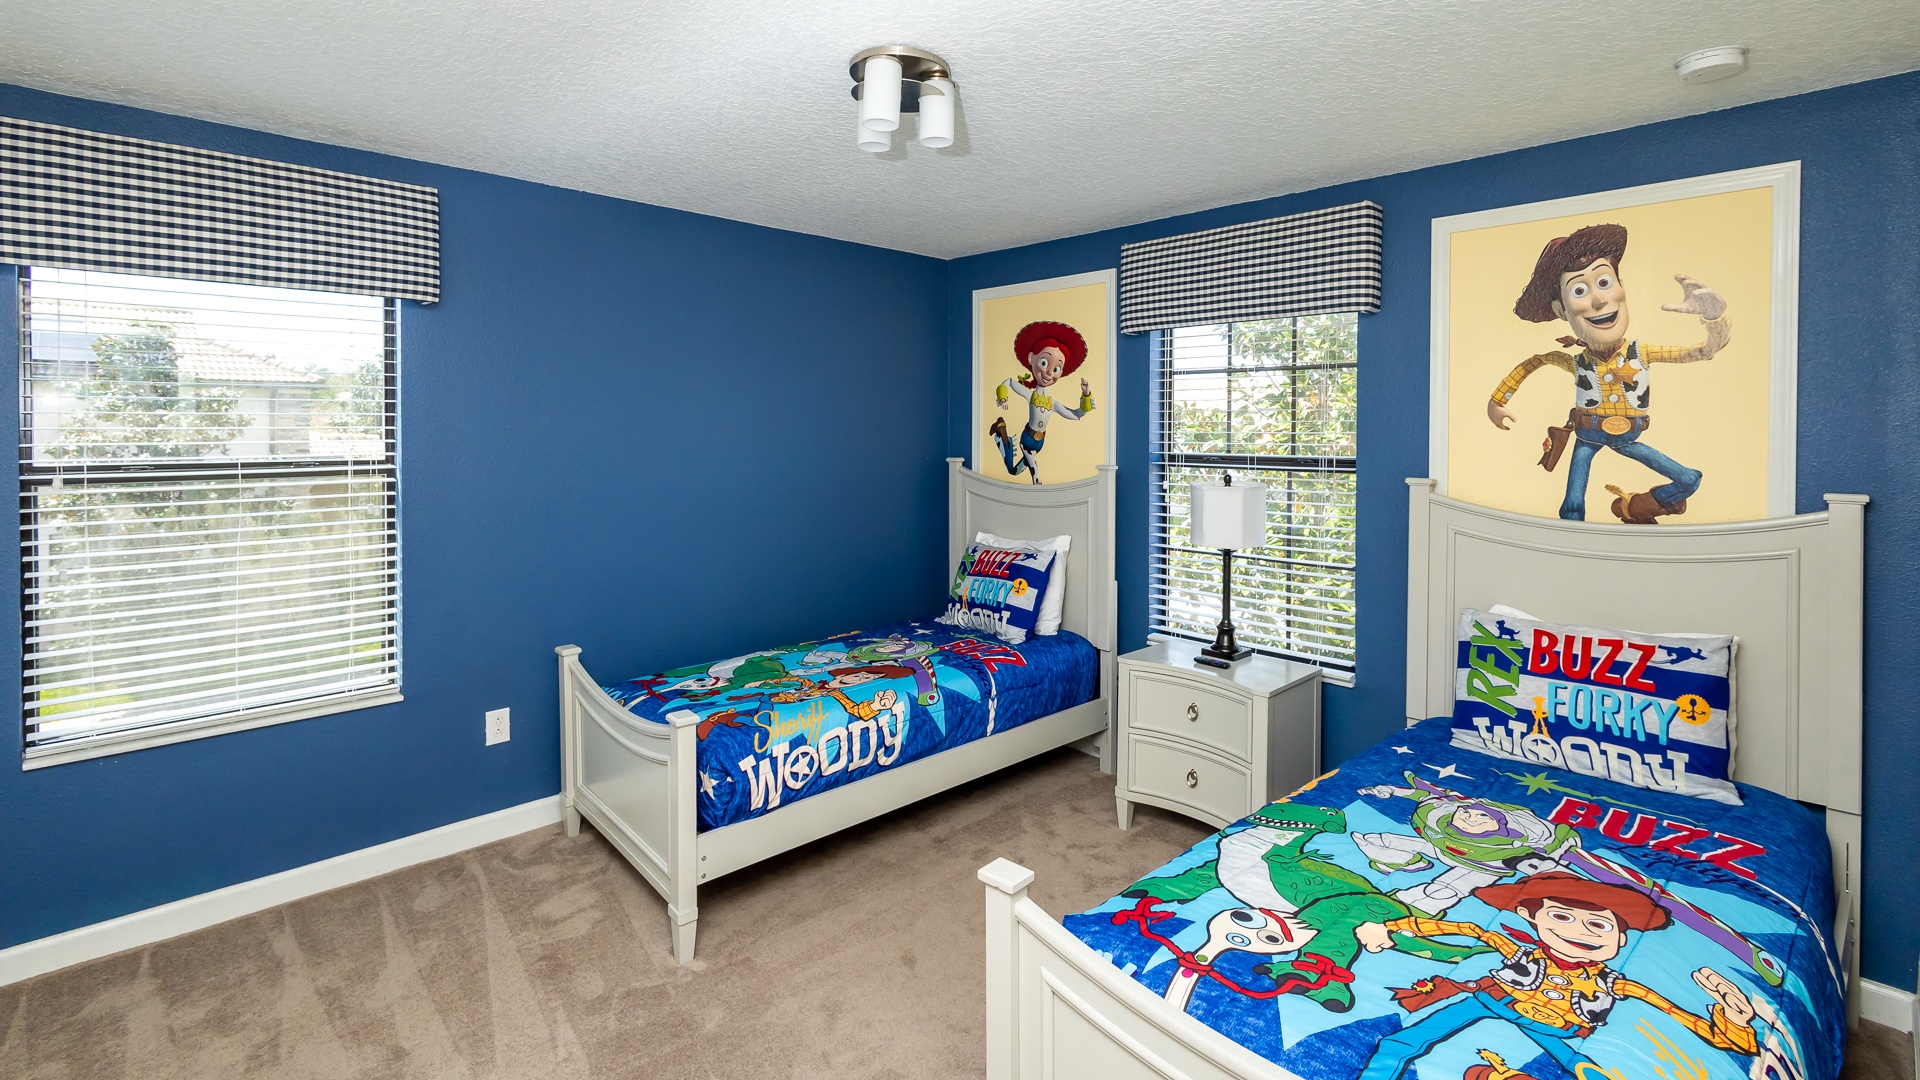 Bedroom 5 Toy Story themed with 2 twin beds, and Smart TV